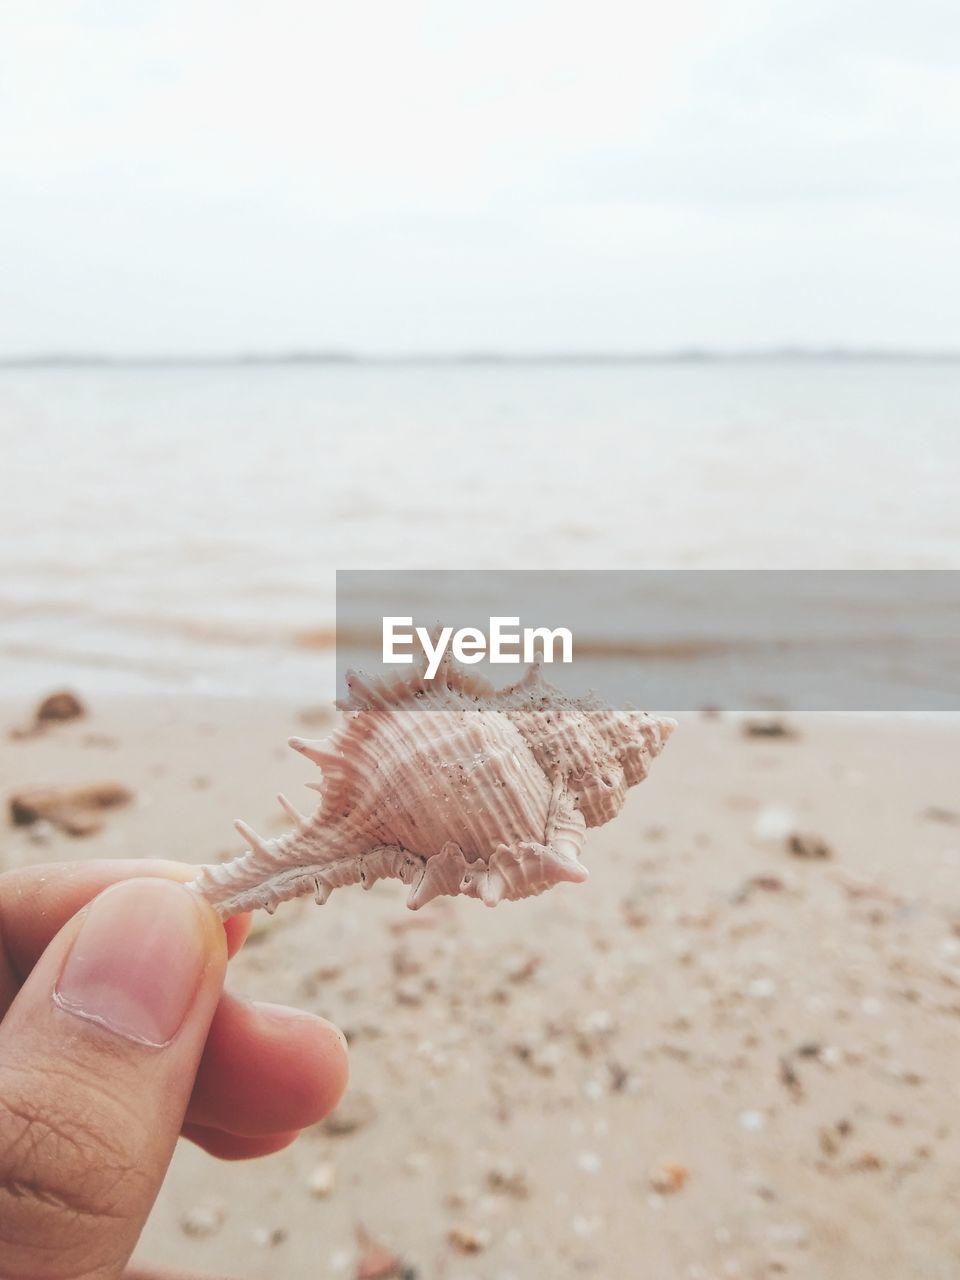 hand, beach, sea, shell, land, water, one person, sand, holding, nature, finger, focus on foreground, horizon over water, day, sky, horizon, leisure activity, beauty in nature, personal perspective, close-up, animal, outdoors, animal wildlife, adult, animal themes, lifestyles, animal shell